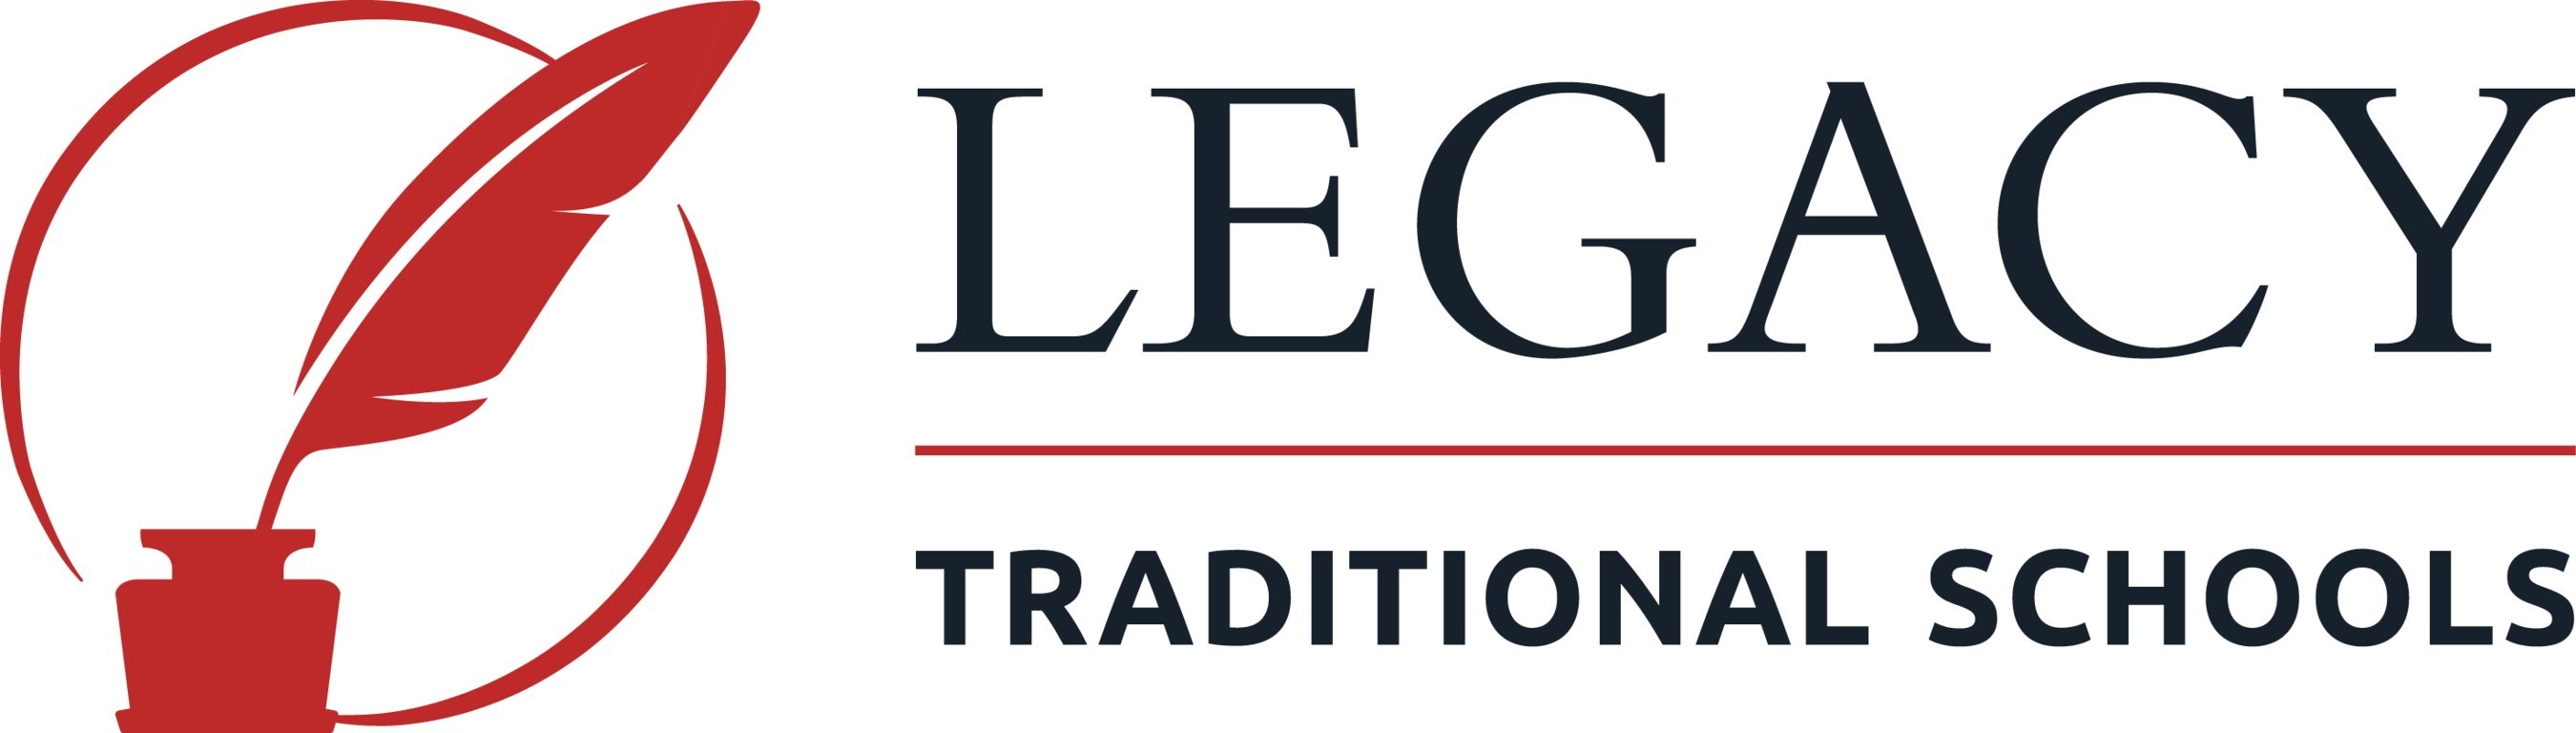 Legacy Traditional Schools Expands with Approval of Third Campus